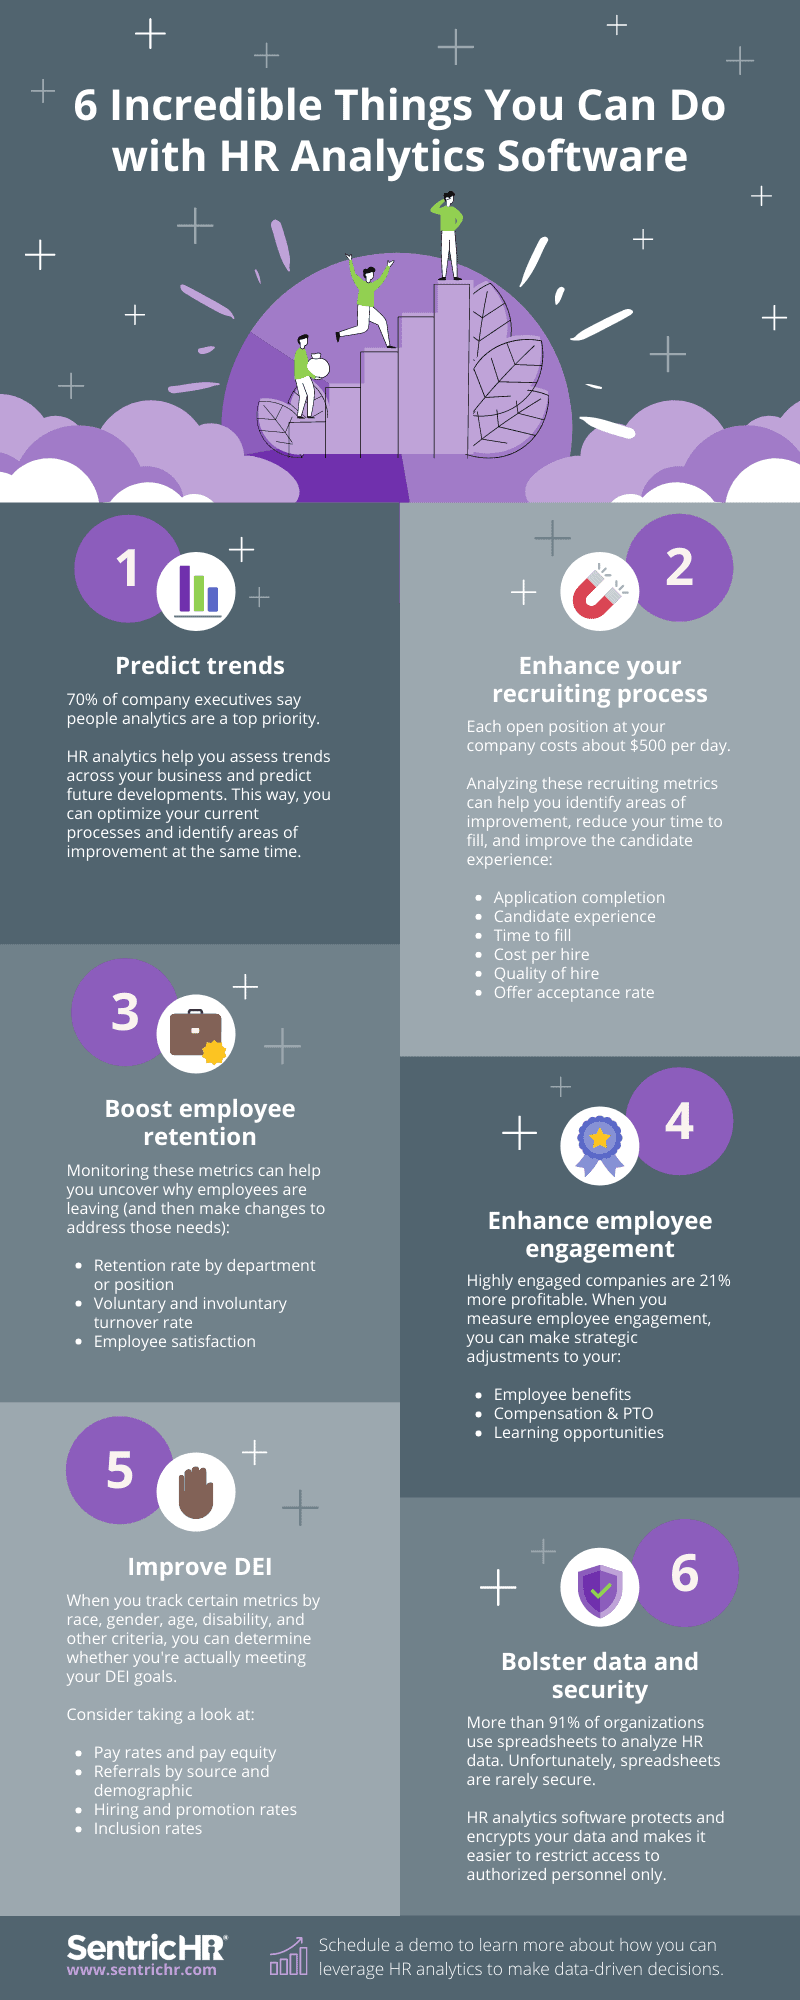 An infographic that shares 6 incredible things HR professionals can do with HR analytics software